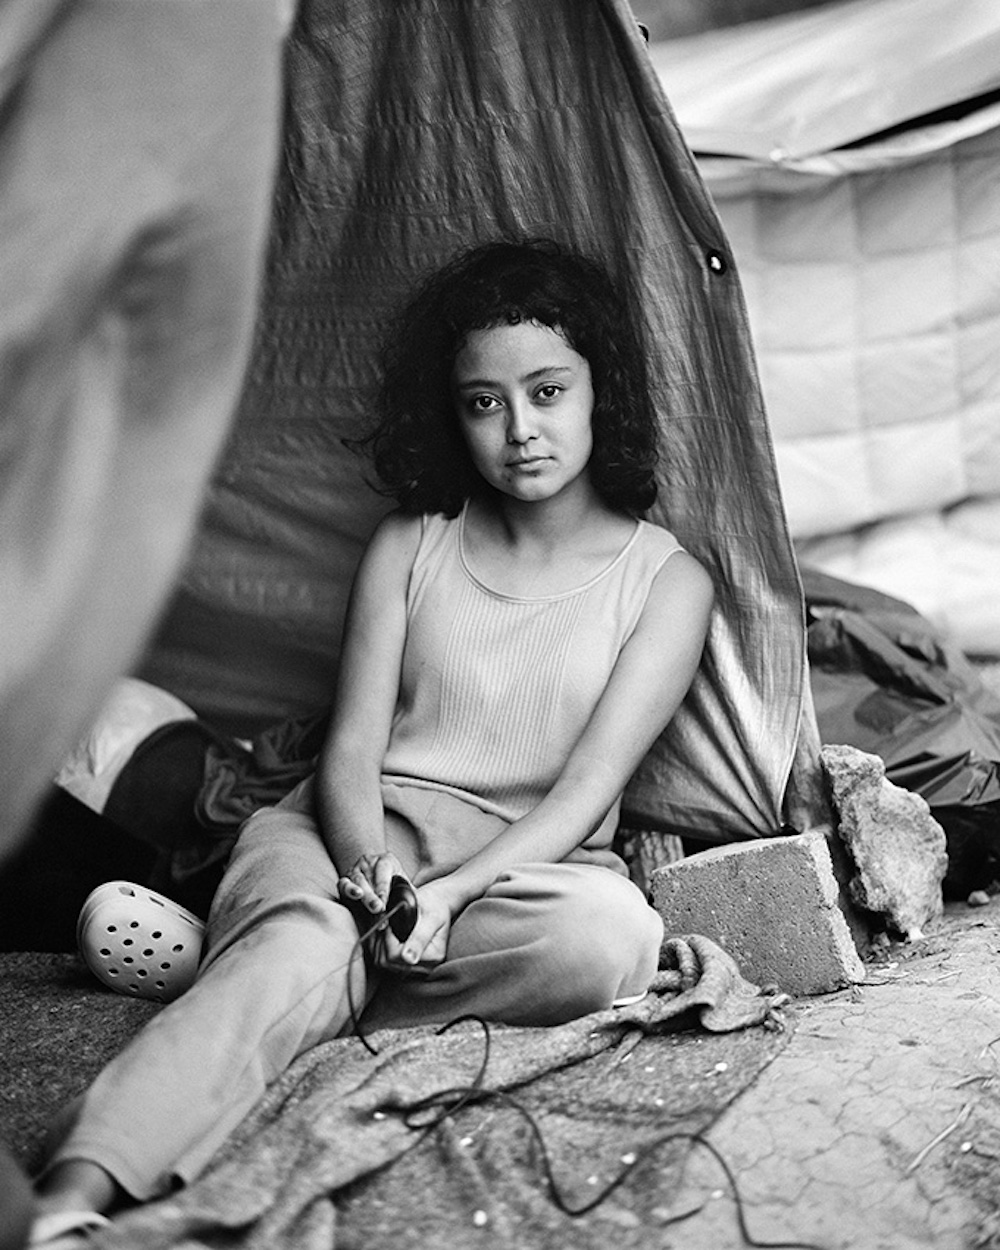 Stephanie Solano, age 17, from Zacapa, Guatemala. She takes a portrait of herself at an informal migrant camp at a municipal park in Reynosa, Tamaulipas, Mexico on 3 May 2021. Series Name: Migrantes. © Adam Ferguson, Australia, Photographer of the Year, Professional, Portraiture, 2022 Sony World Photography Awards